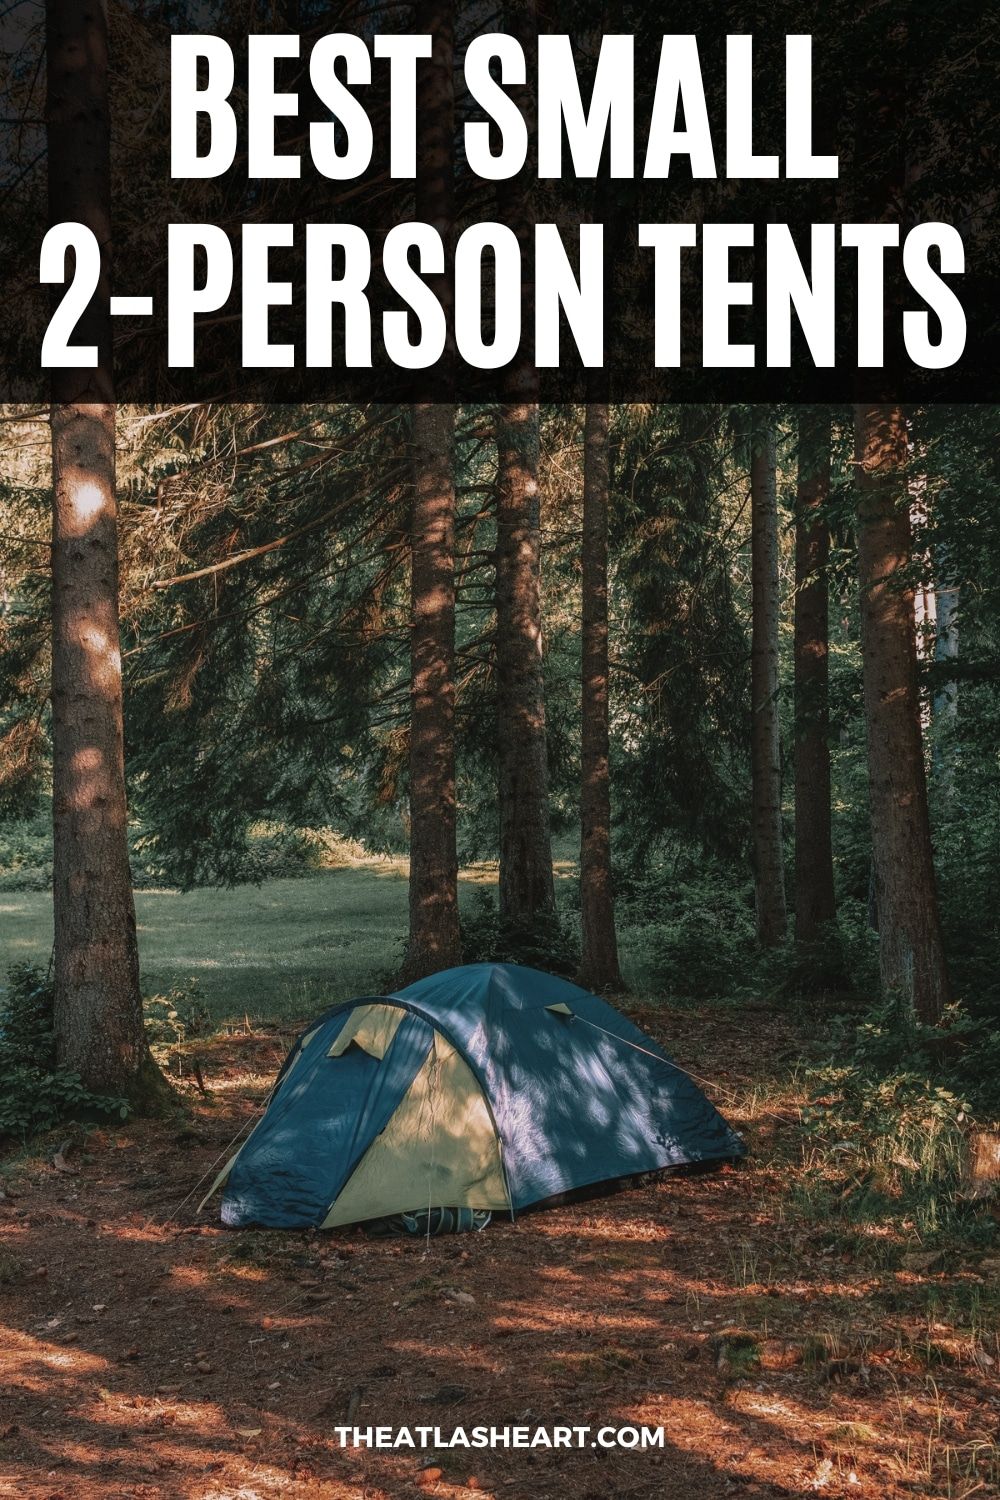 Best Small 2-Person Tents for Backpacking and Lightweight Camping